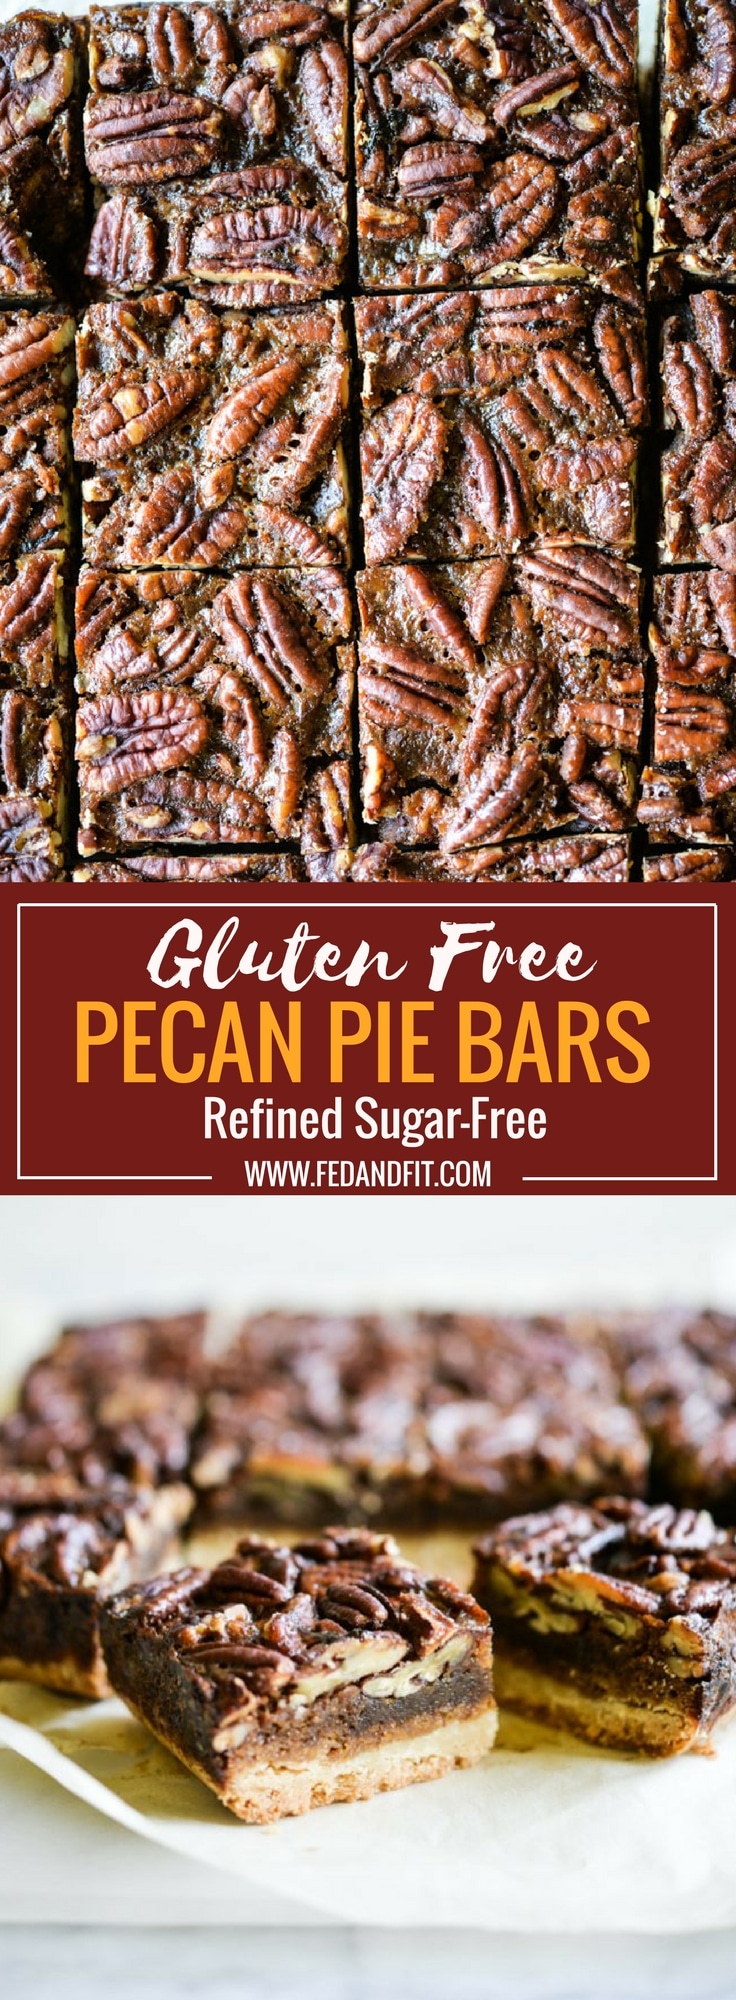 These pecan pie bars are gluten and refined sugar-free and combine traditional pecan pie filling with a buttery shortbread crust. They are perfect to impress your guests this holiday season! | Fed & Fit